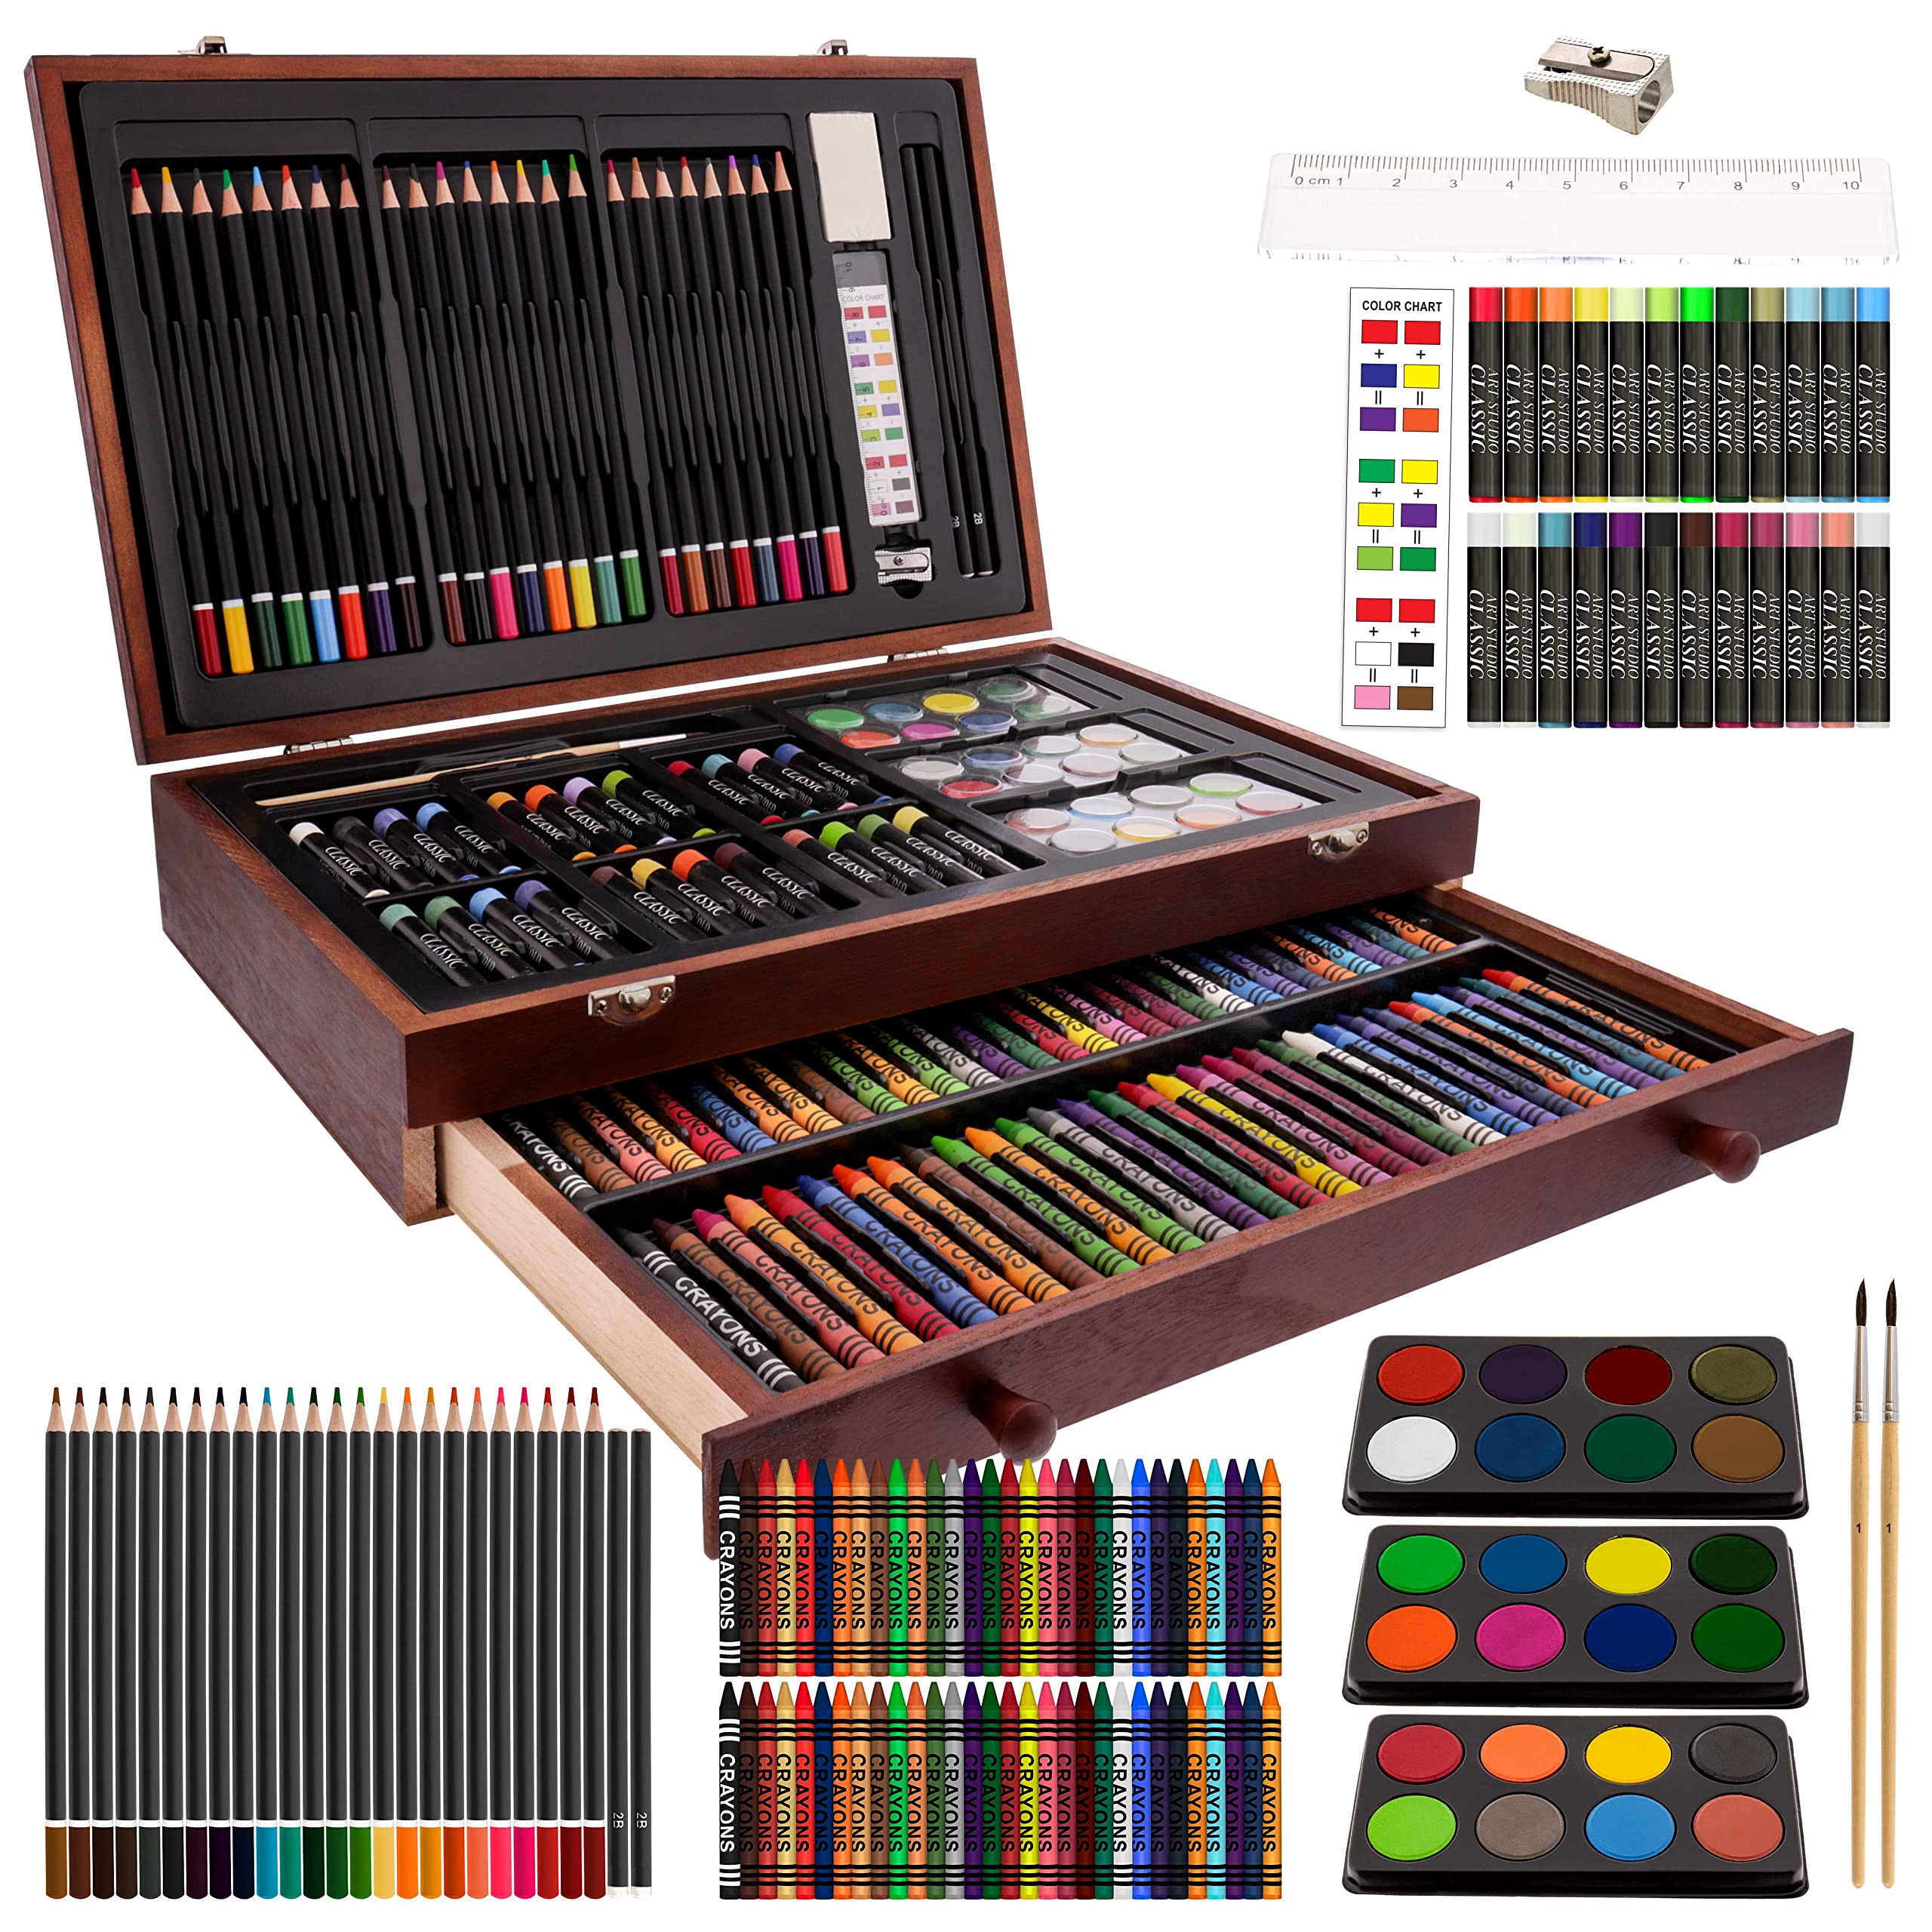 Thornton's Art Supply 150 Pcmulticolored Pencil Artist Drawing Set